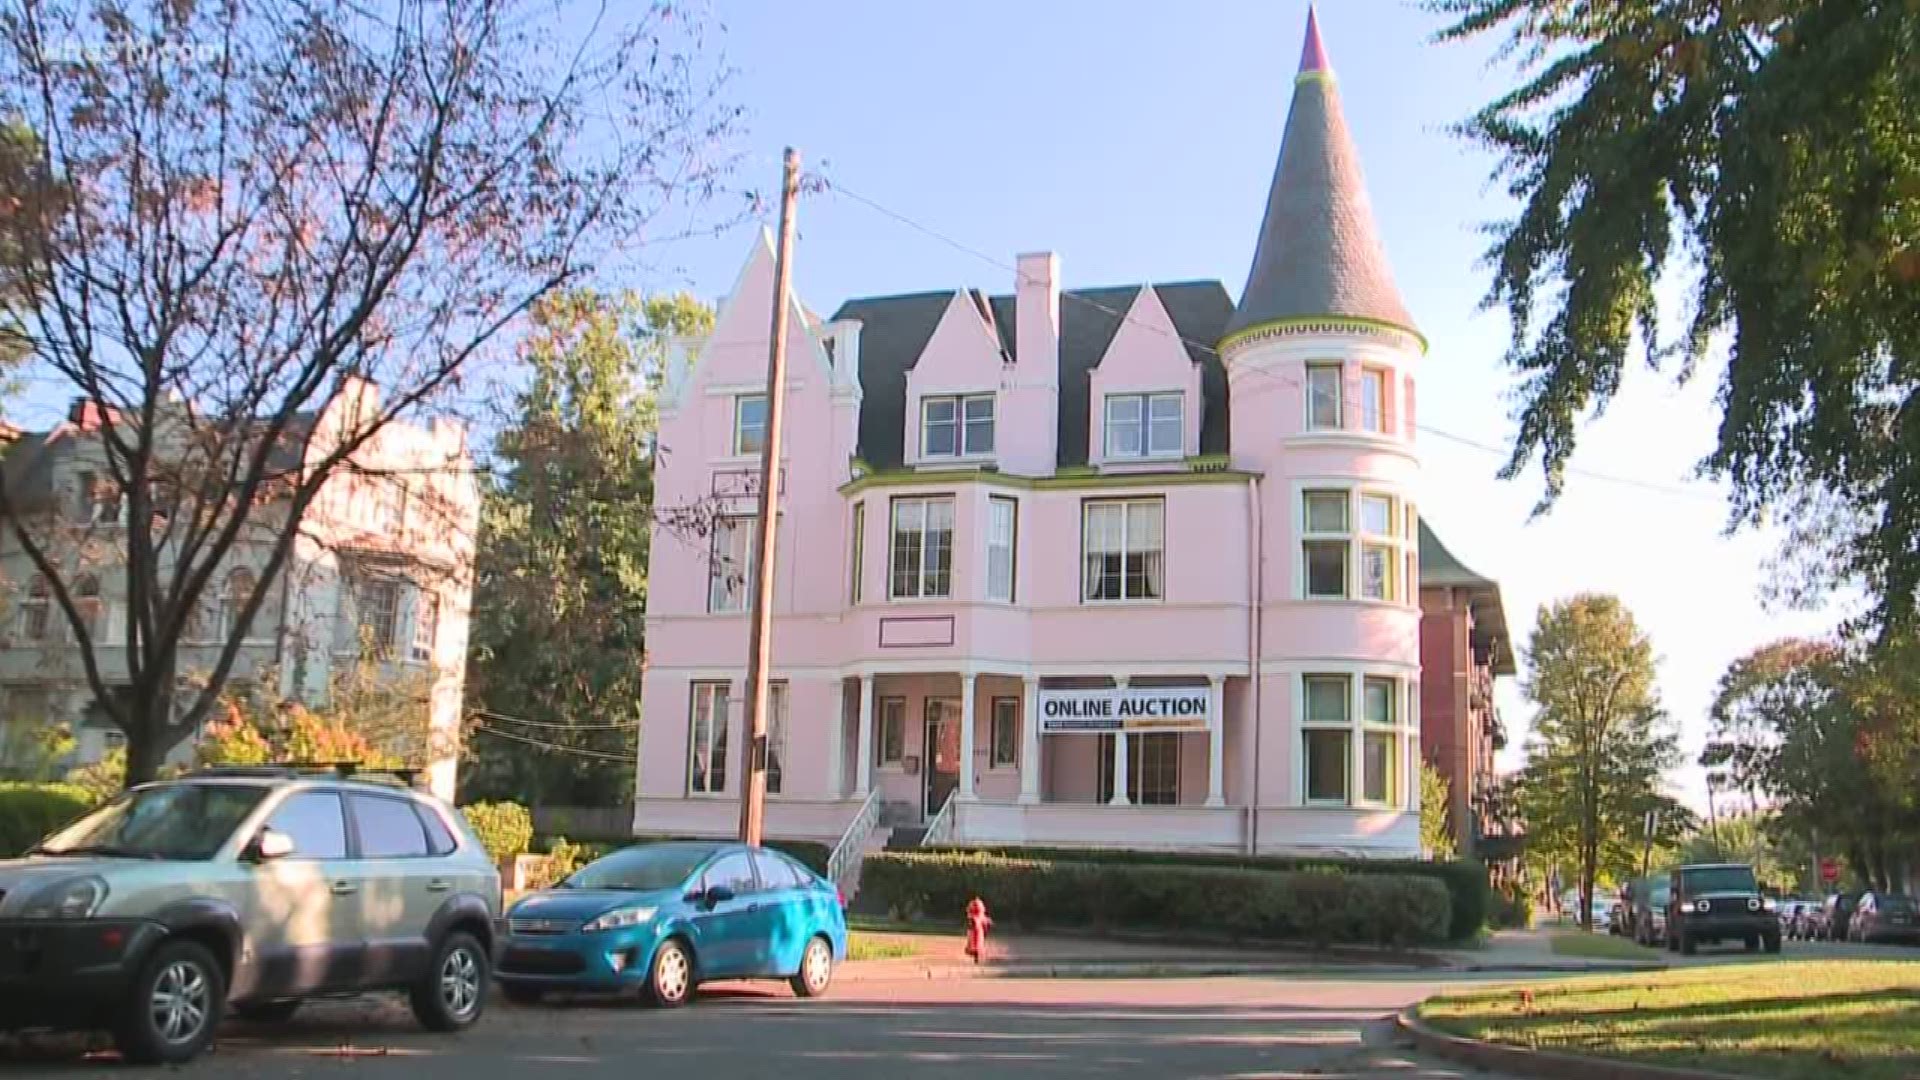 The Pink Palace, an iconic home on St. James Court, will be up for auction in October.